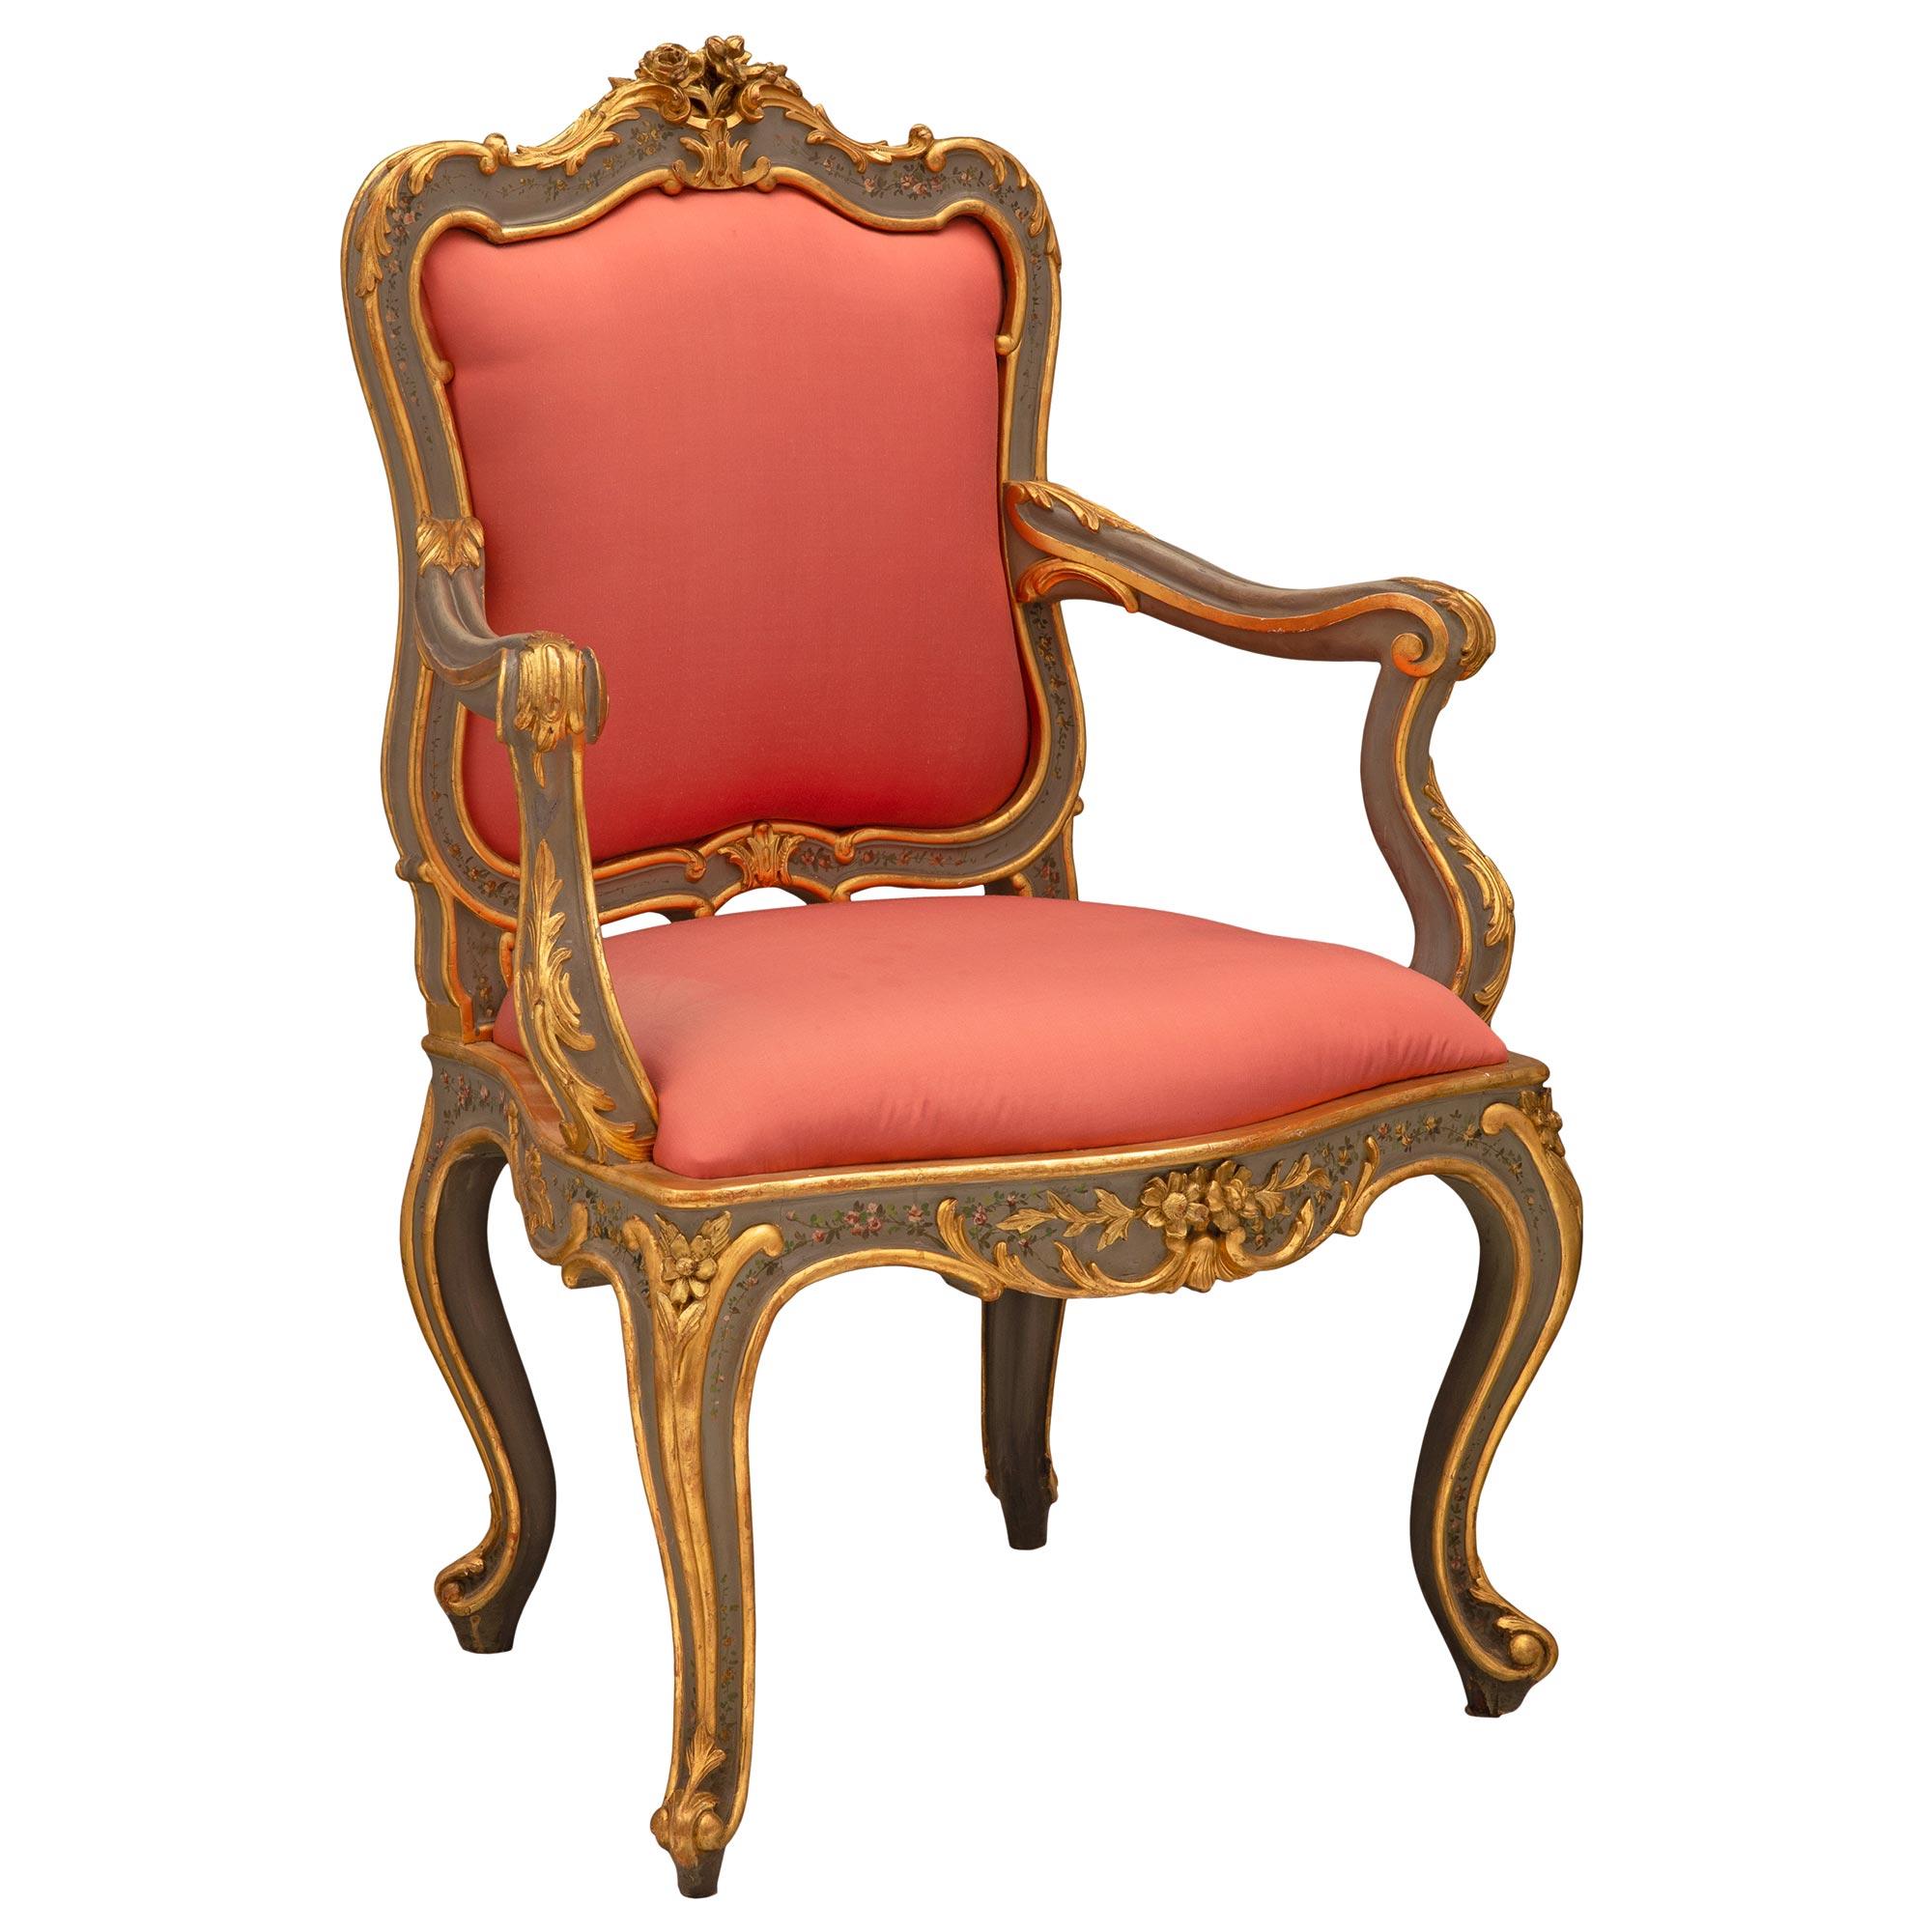 A striking and most decorative pair of Italian 19th century Louis XV st. patinated and giltwood armchairs. Each chair is raised by most elegant cabriole legs with fine scrolled feet and decorative giltwood filets which extend up each leg and along